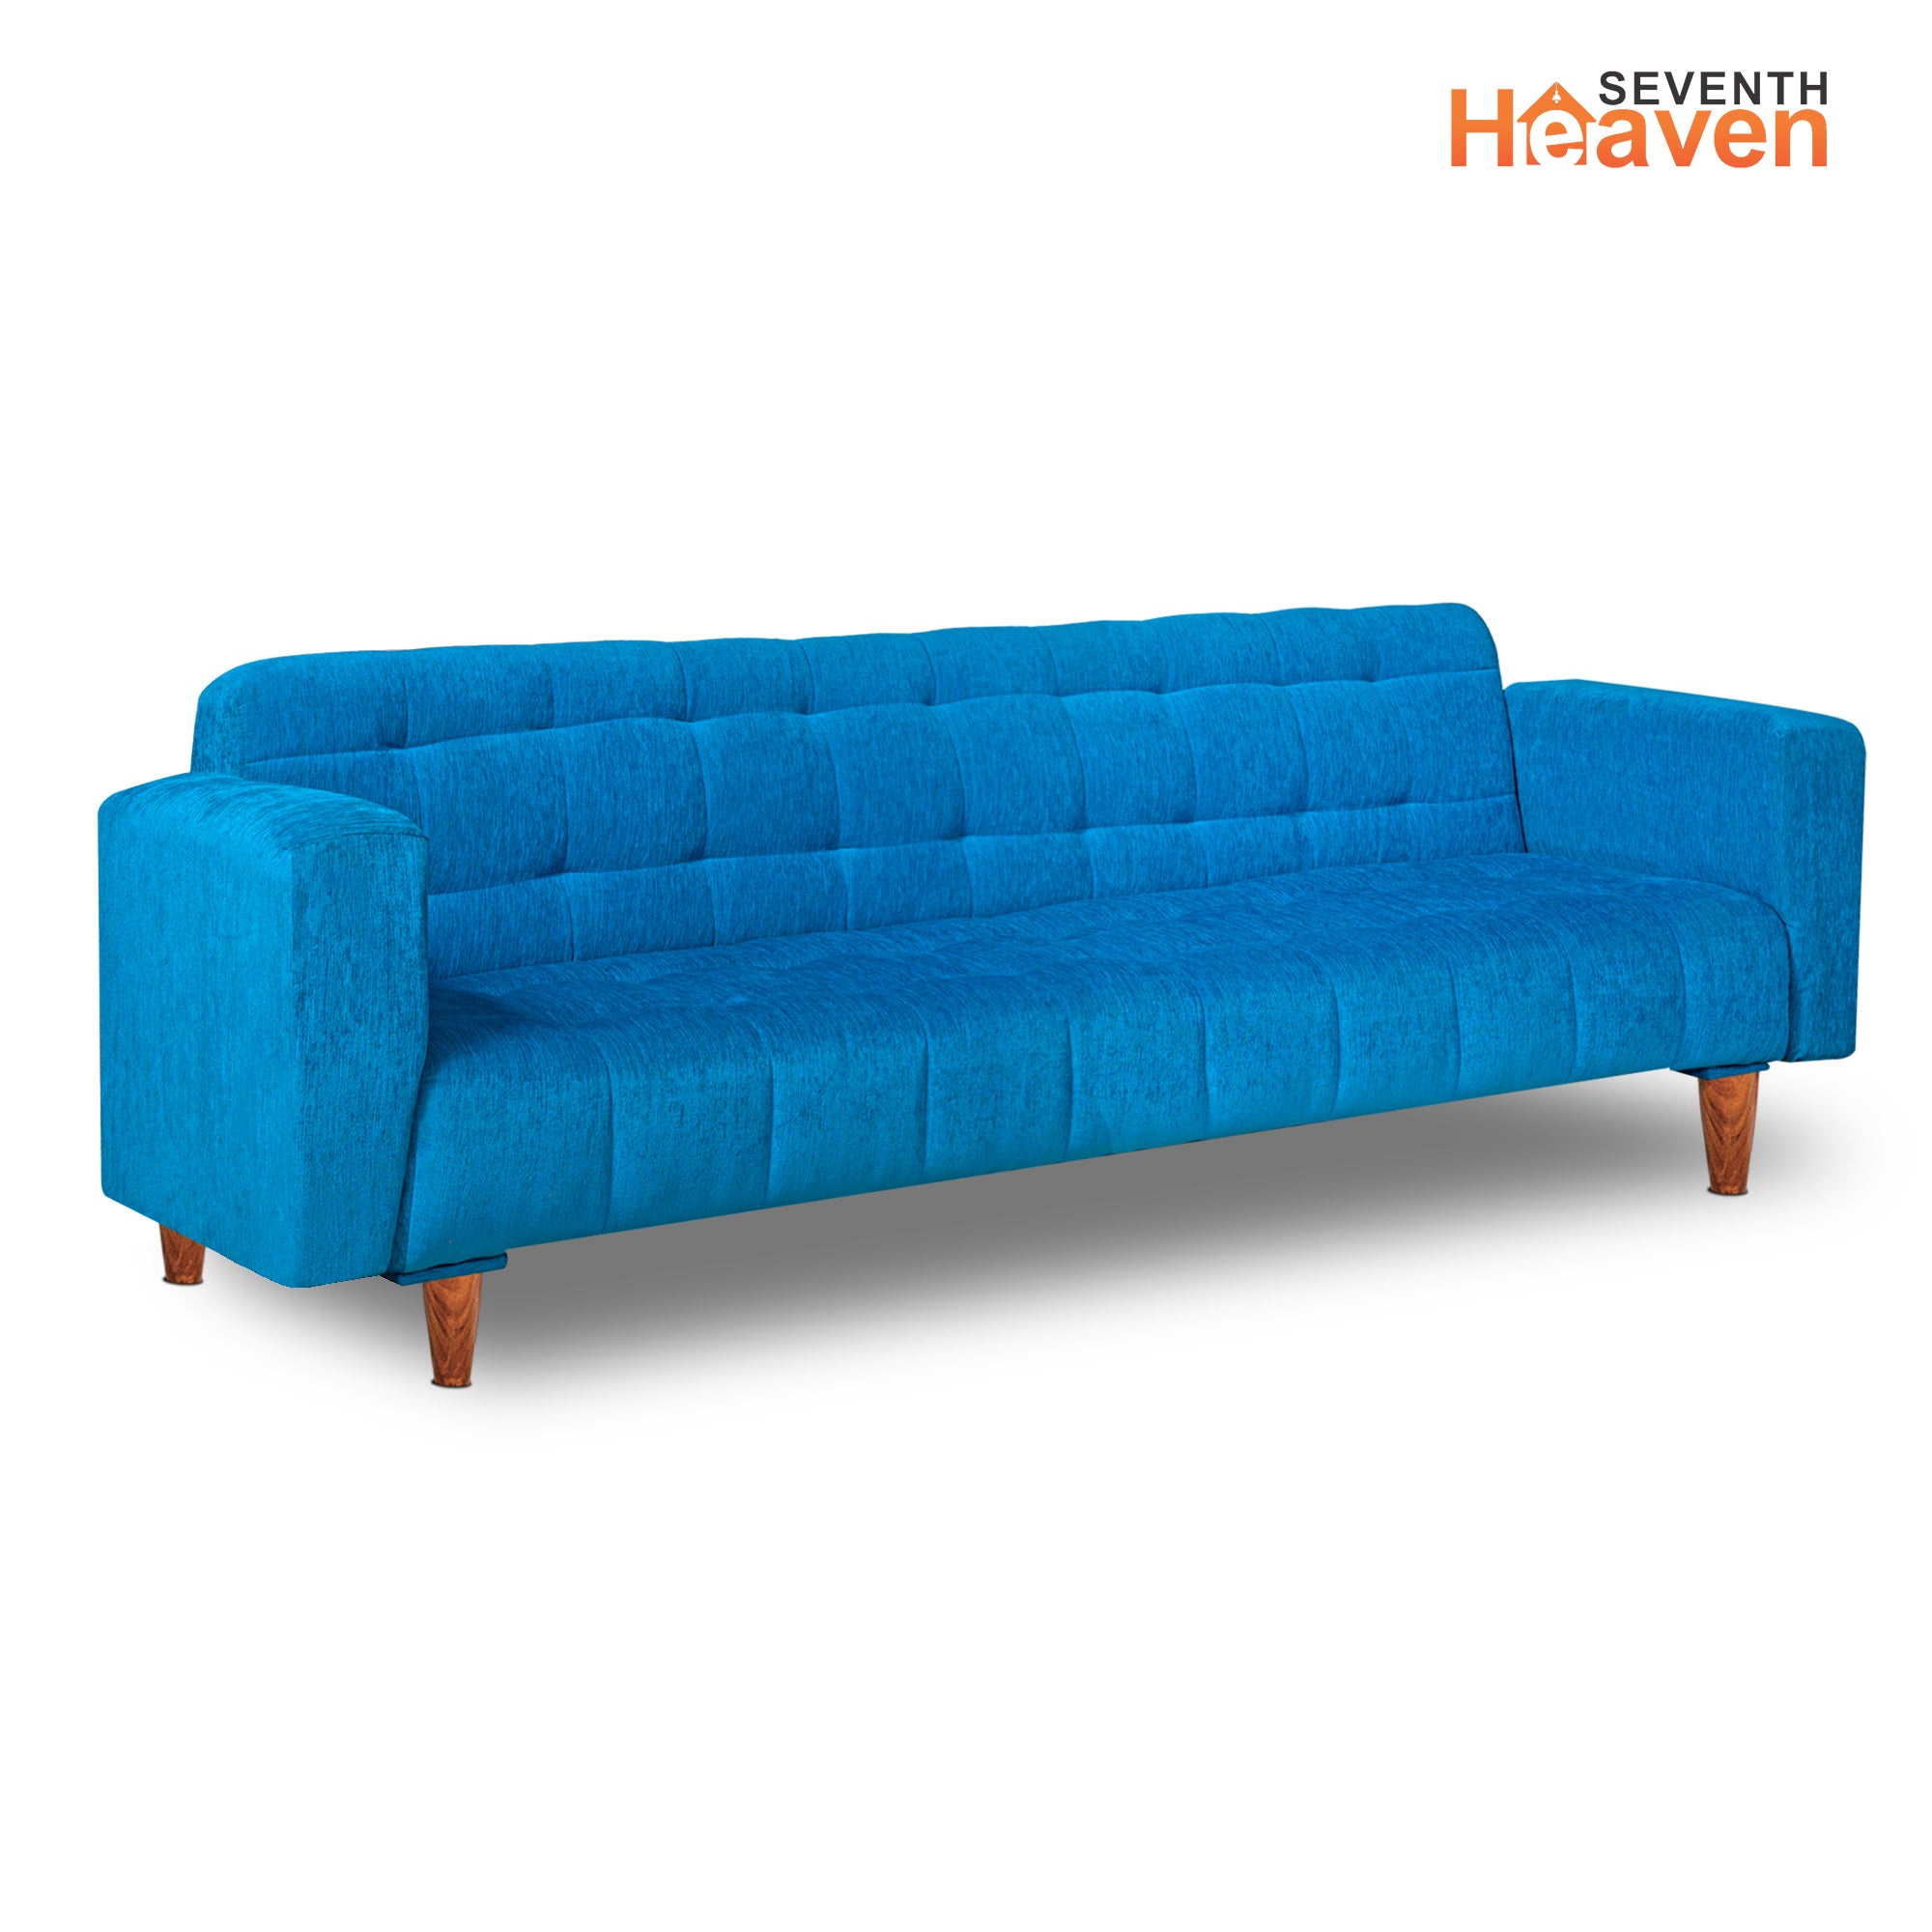 Seventh Heaven 4 Seater Wooden Sofa cum Bed, Chenille Molfino Fabric 72x36x16: 3 Year Warranty 4 Seater Single Solid Wood Pull Out Sofa Cum Bed  (Finish Color - Sky Blue Delivery Condition - DIY(Do-It-Yourself))